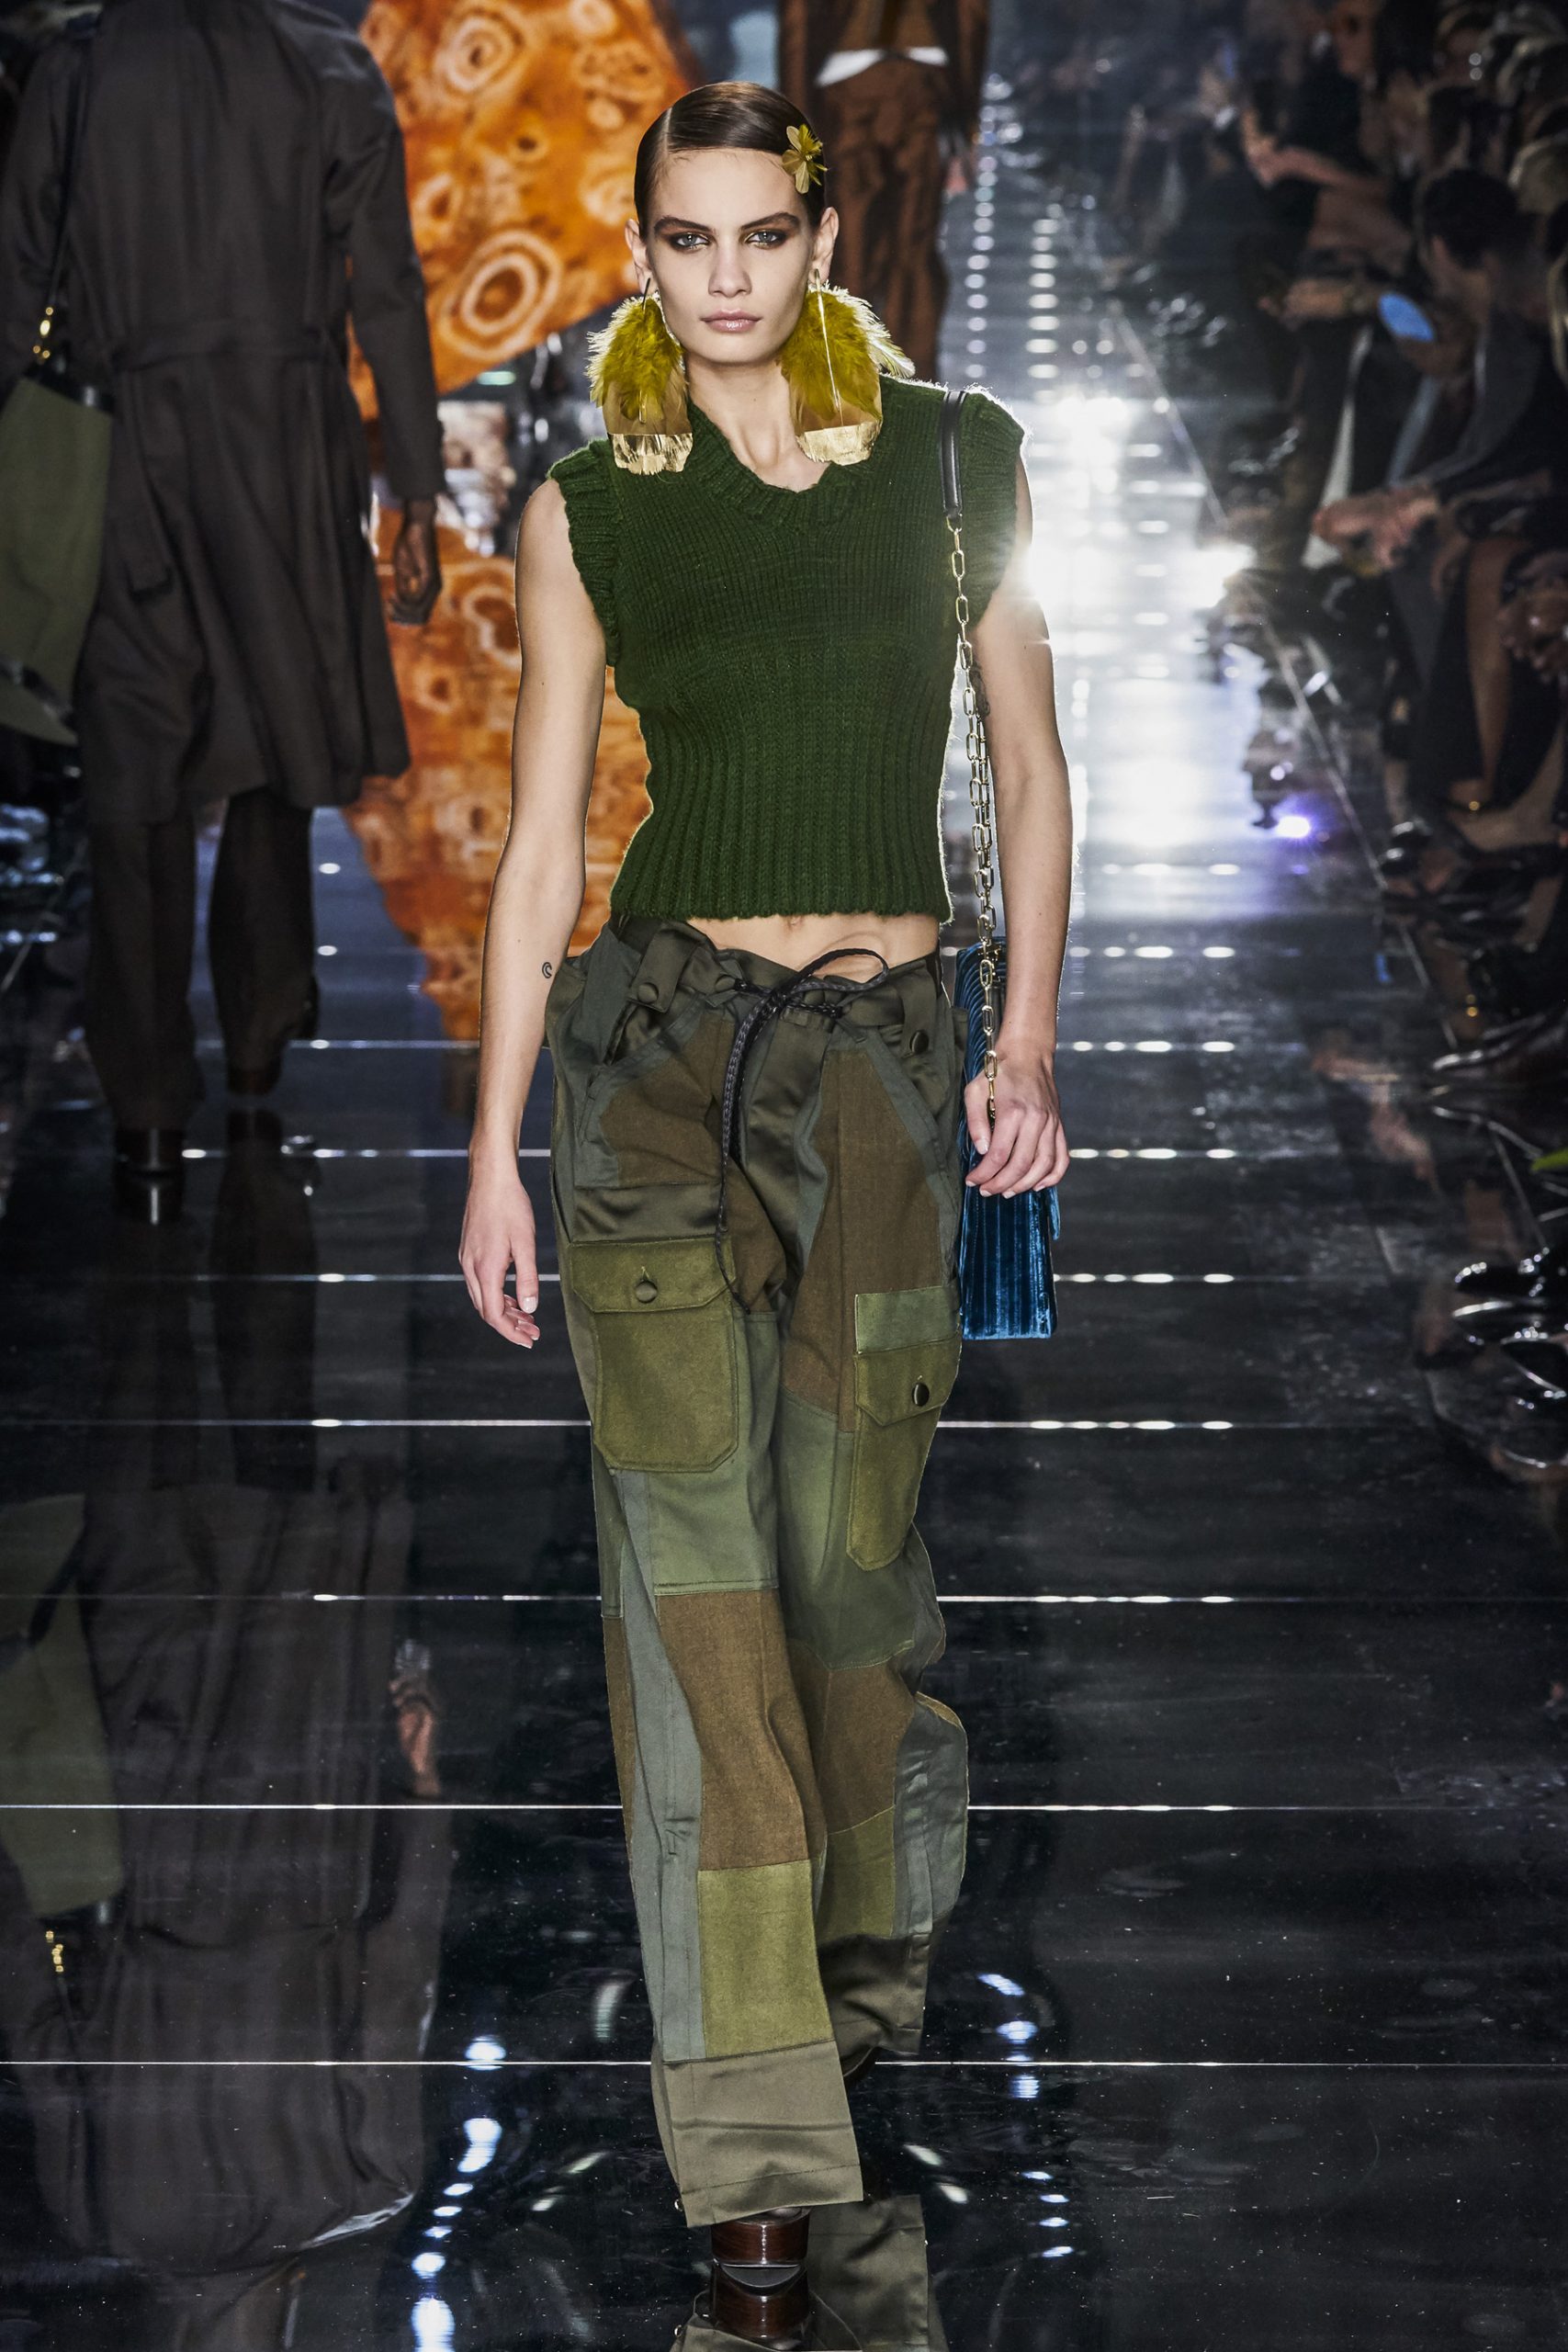 Loden Green Fall 2020 Fashion Trend | The Impression